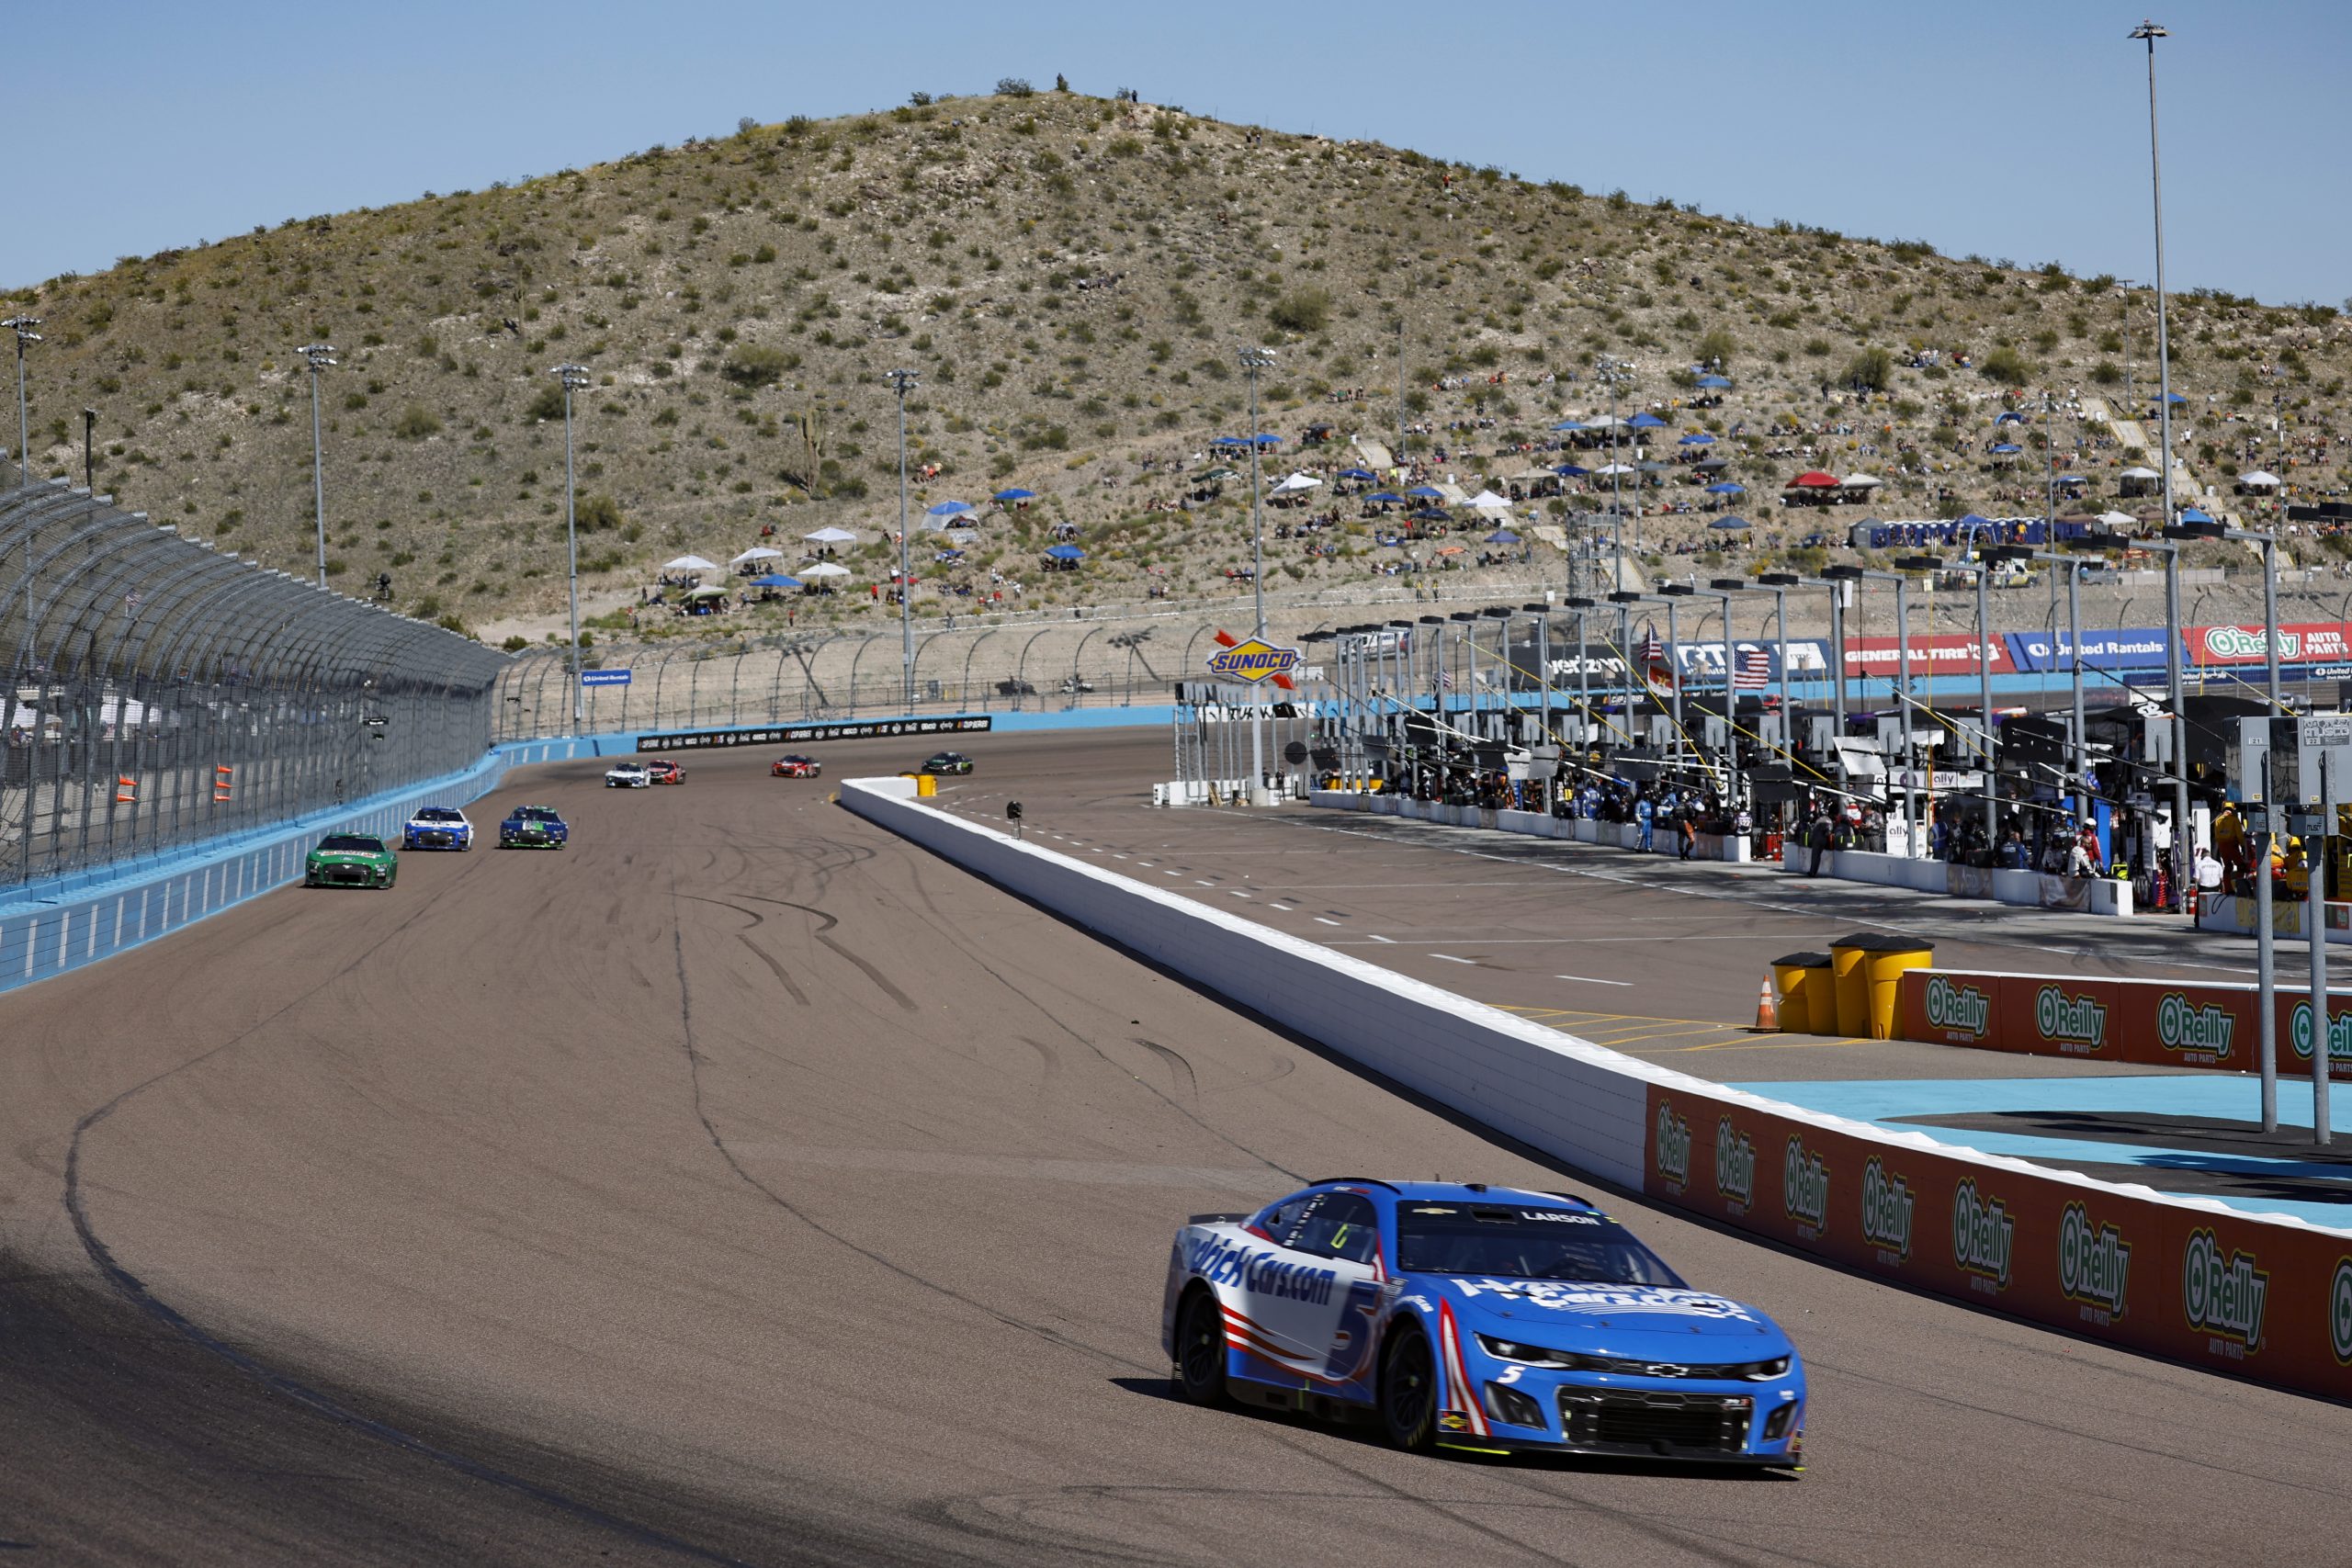 AVONDALE, ARIZONA - MARCH 12: Kyle Larson, driver of the #5 HendrickCars.com Chevrolet, drives during the NASCAR Cup Series United Rentals Work United 500 at Phoenix Raceway on March 12, 2023 in Avondale, Arizona. (Photo by Chris Graythen/Getty Images)